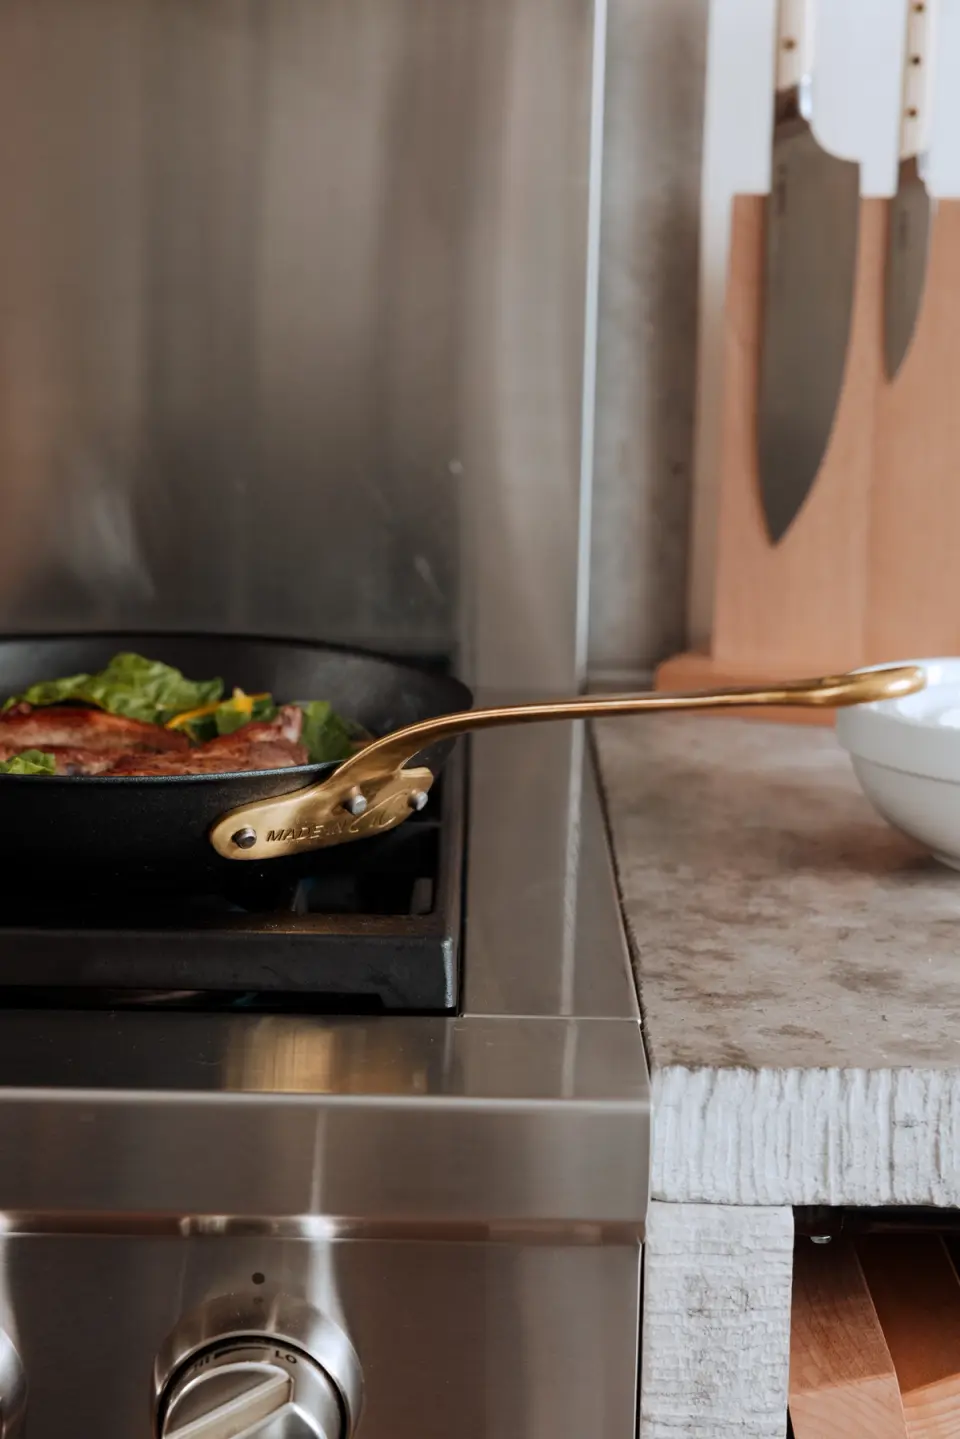 A steak with greens being cooked in a skillet on a stove, with a gold-tone pair of tongs resting on the edge.